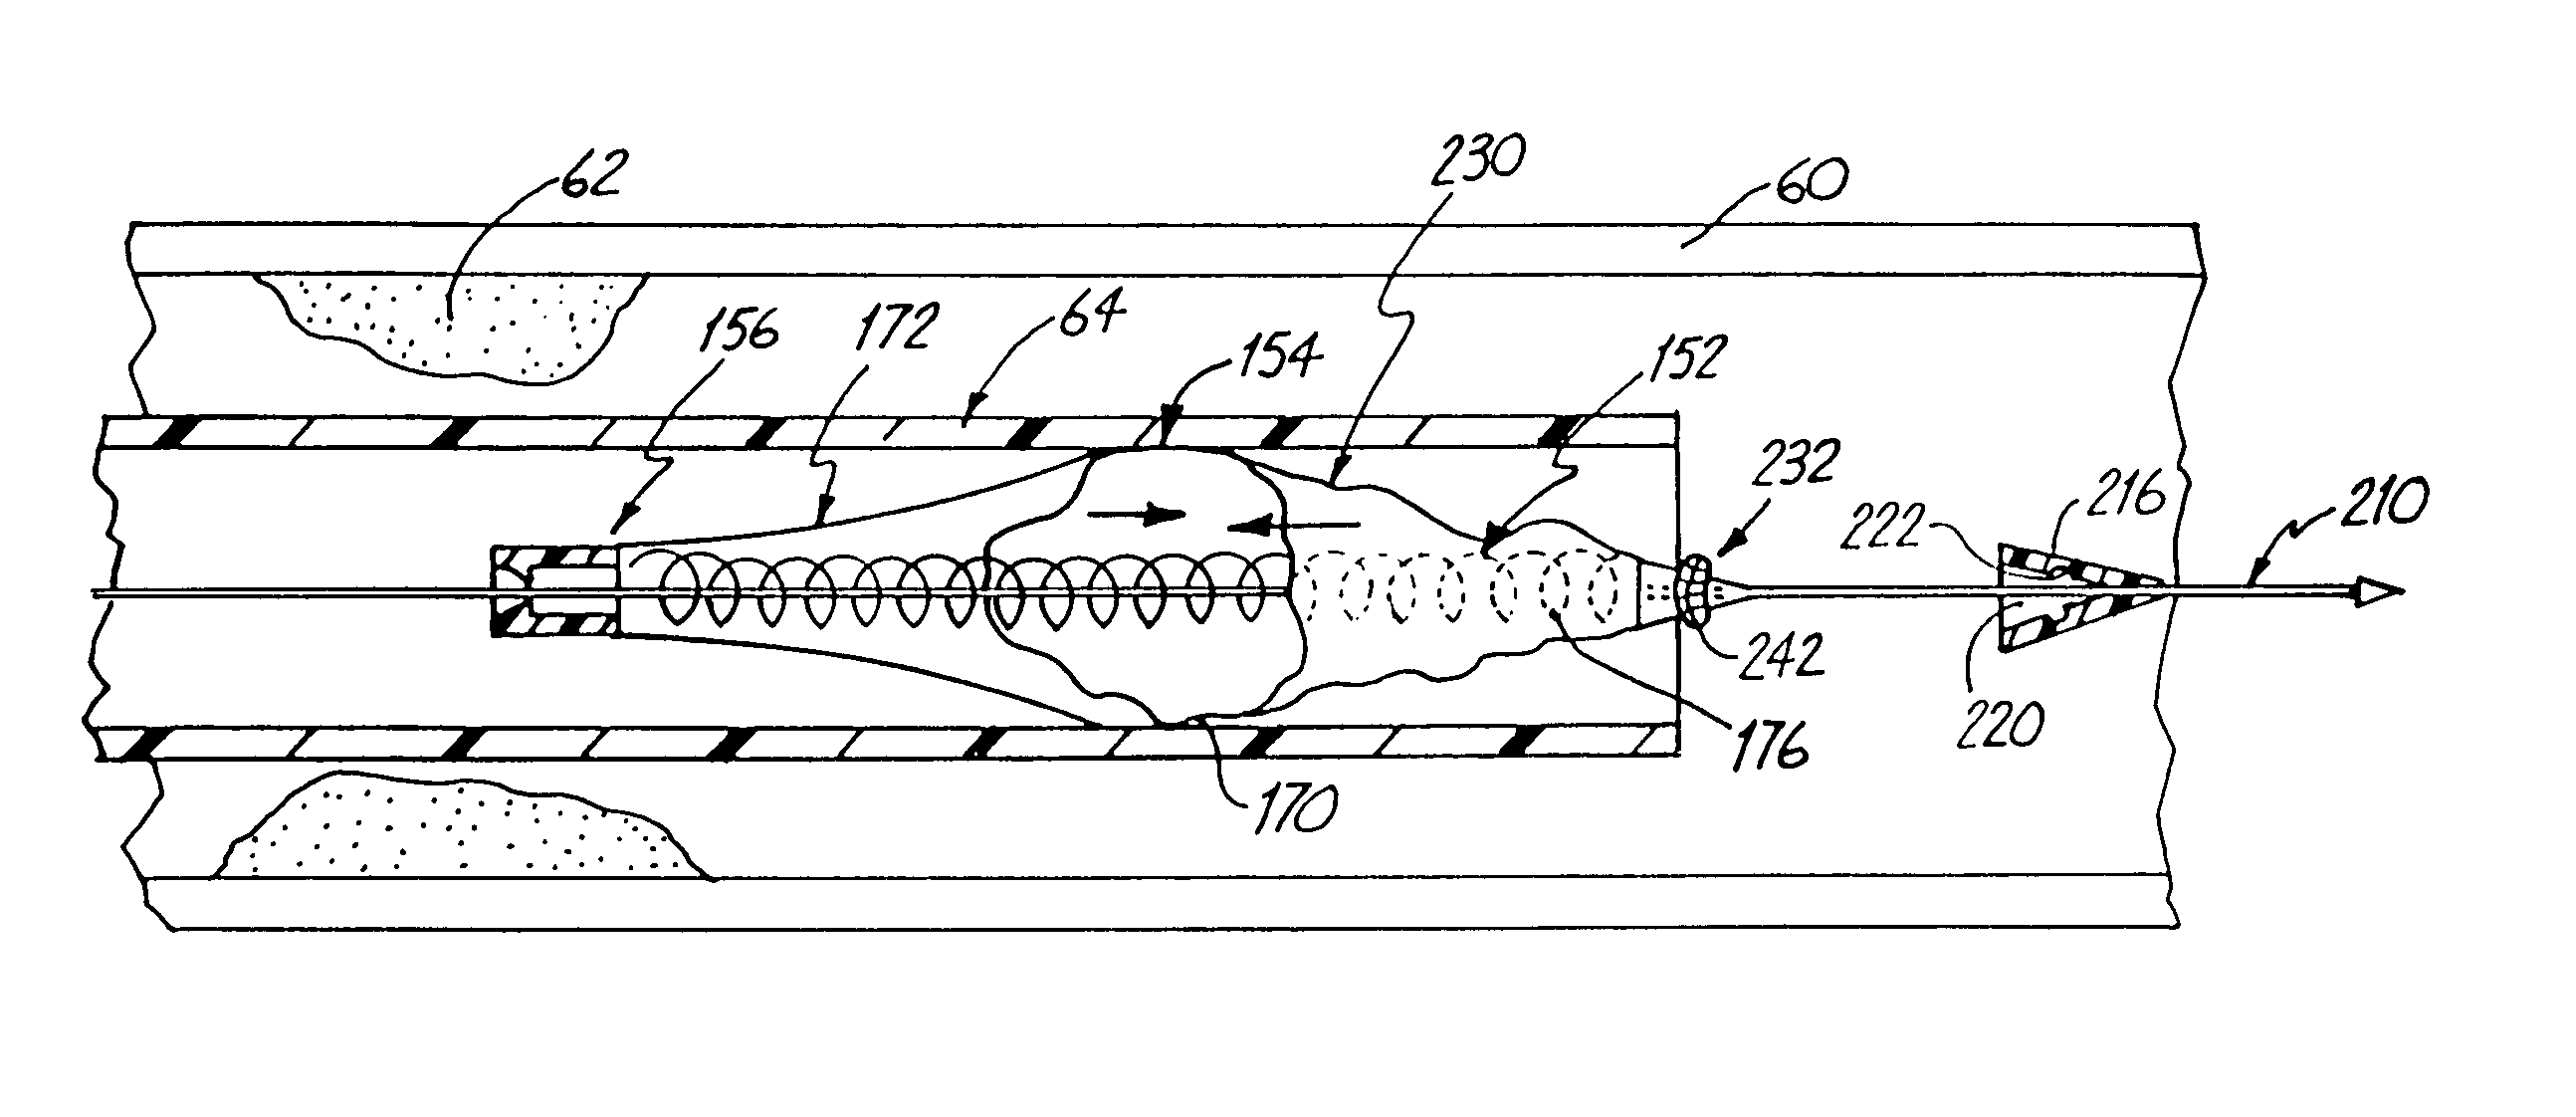 Distal protection device and method